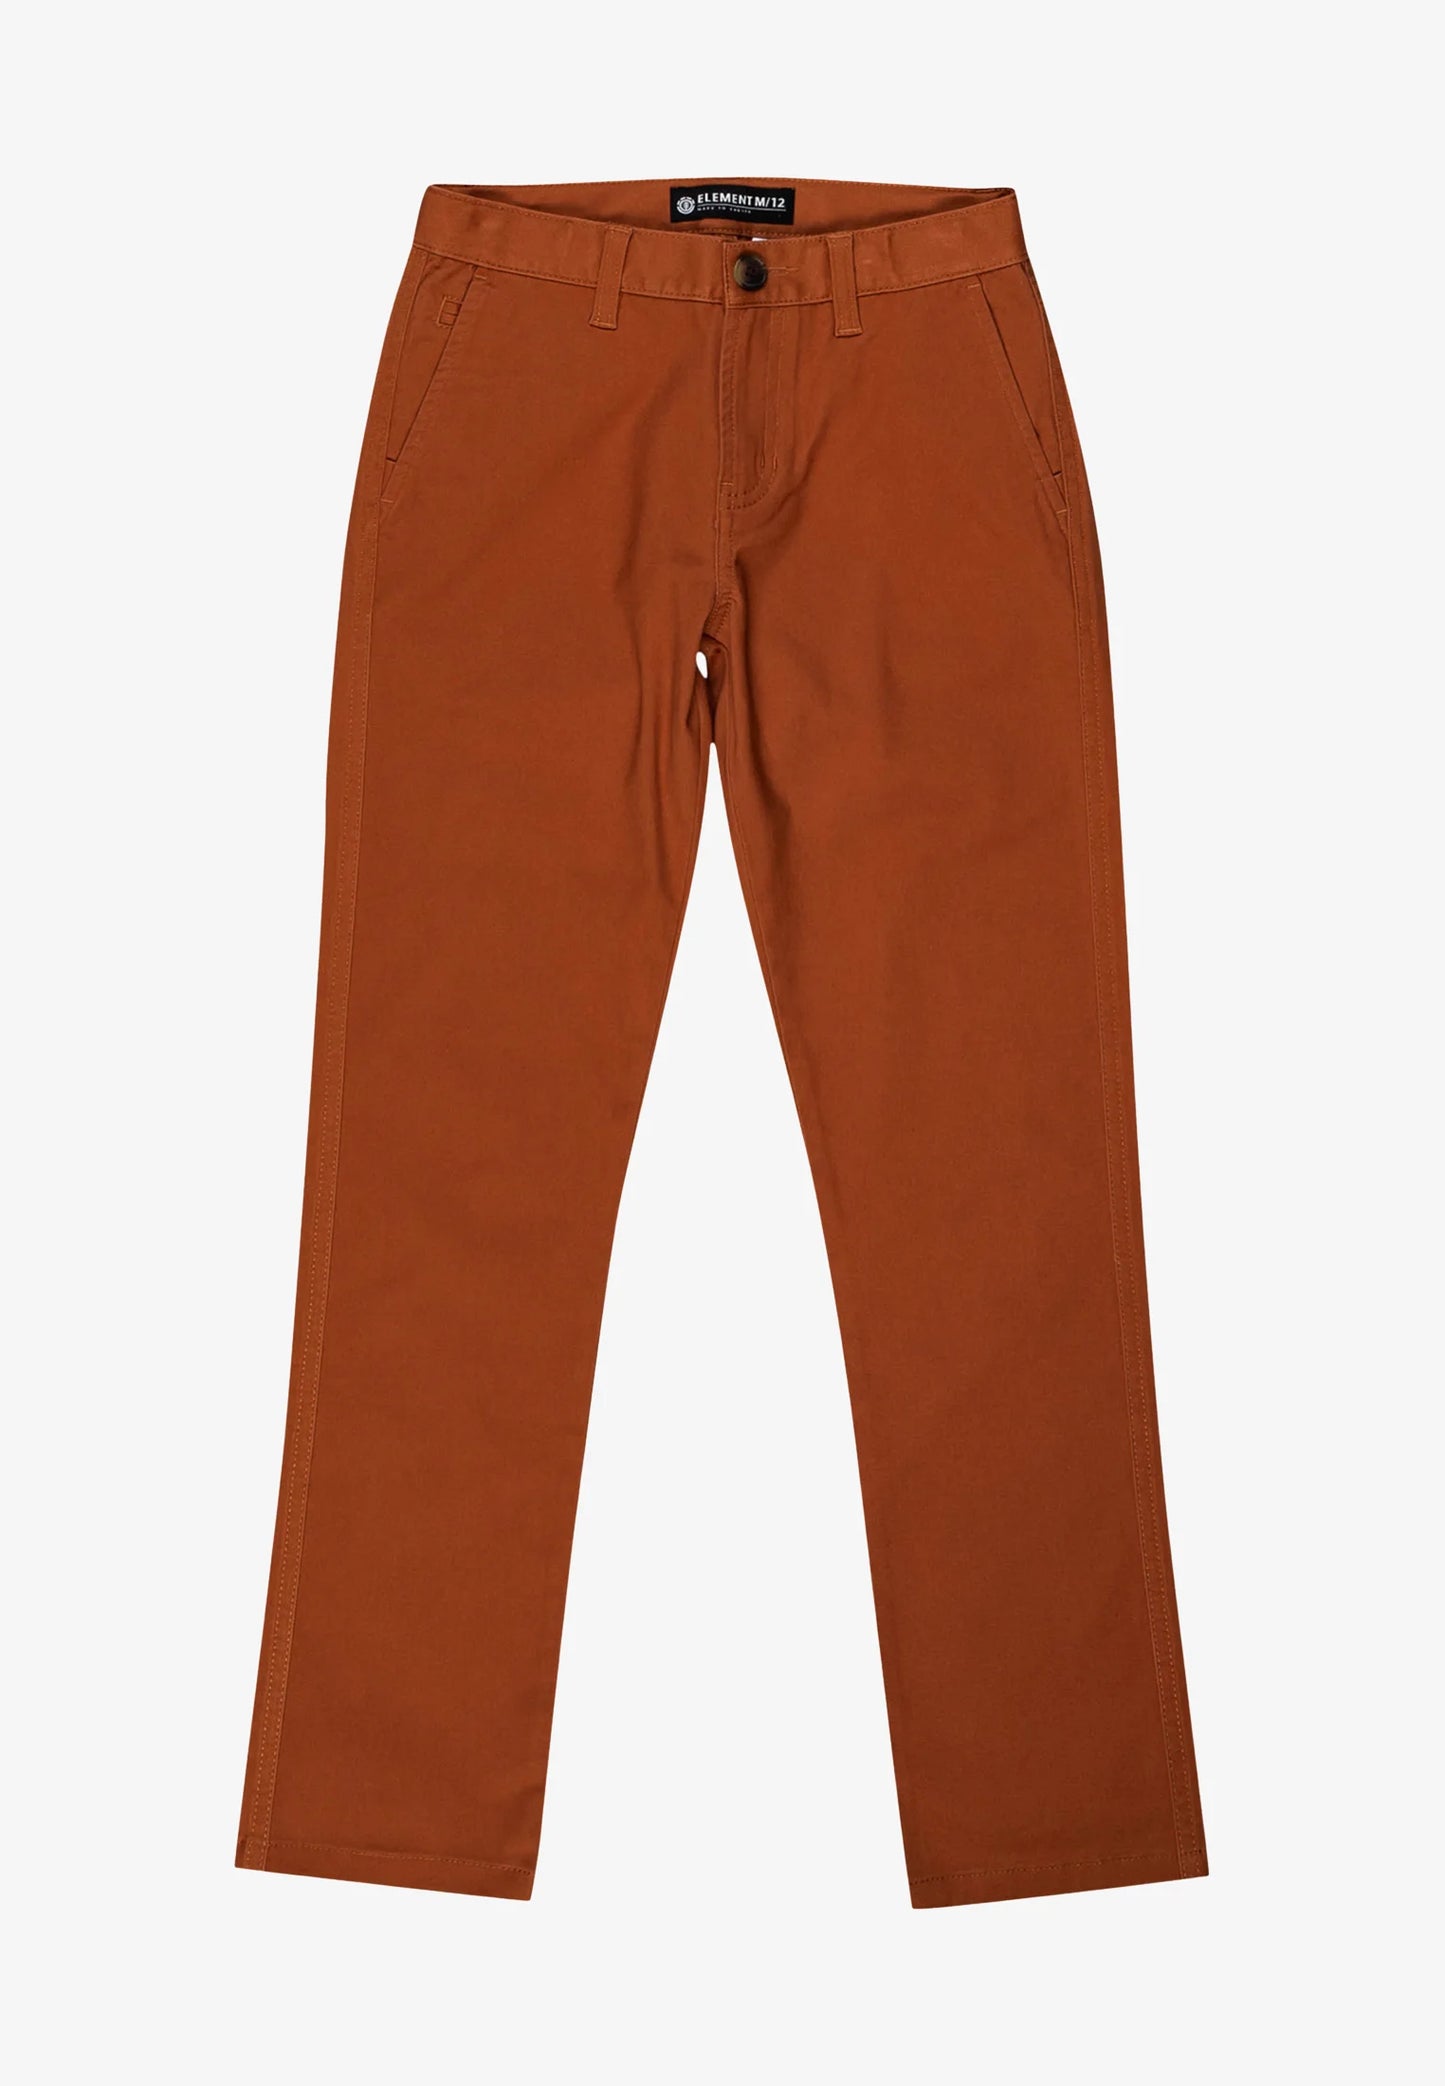 ELEMENT - HOWLAND CLASSIC CHINO YOUTH - MOCHA BISQUE